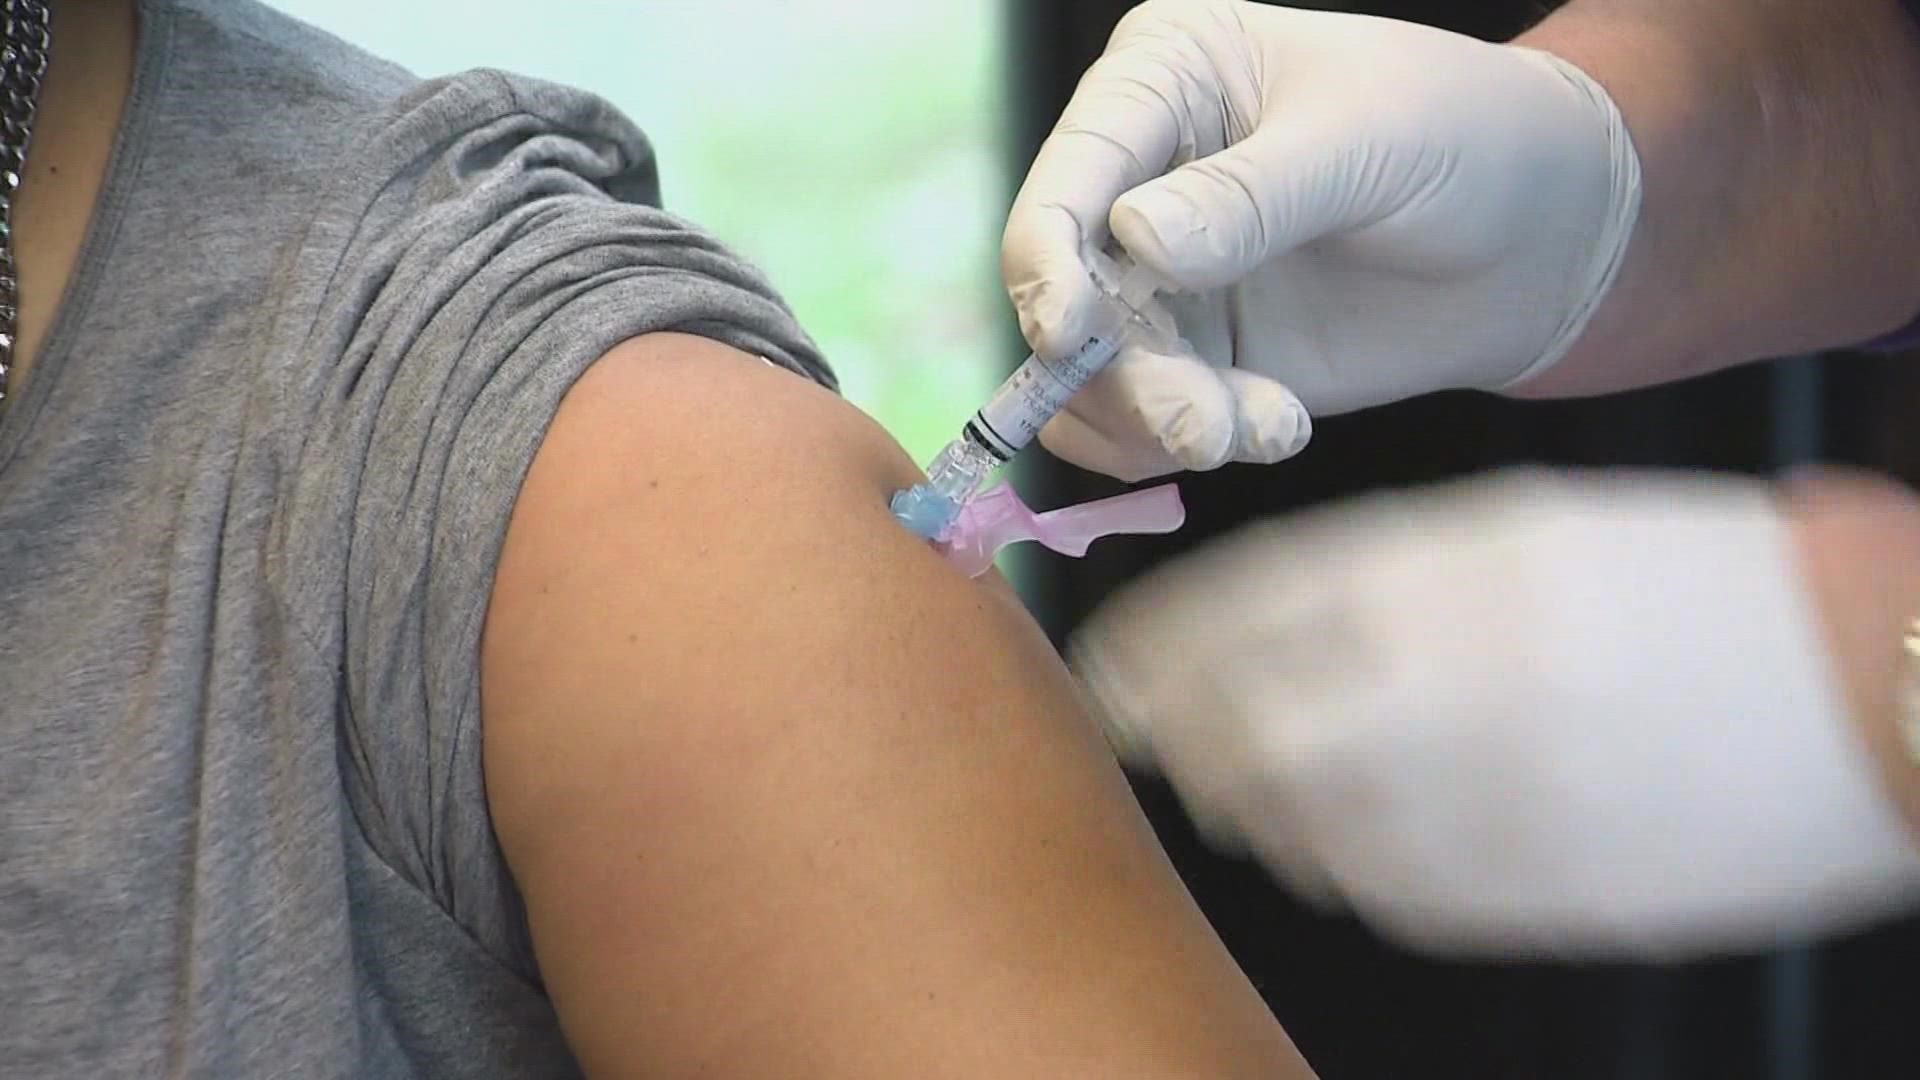 KCHD reported flu cases in Tennessee are going up earlier and faster.